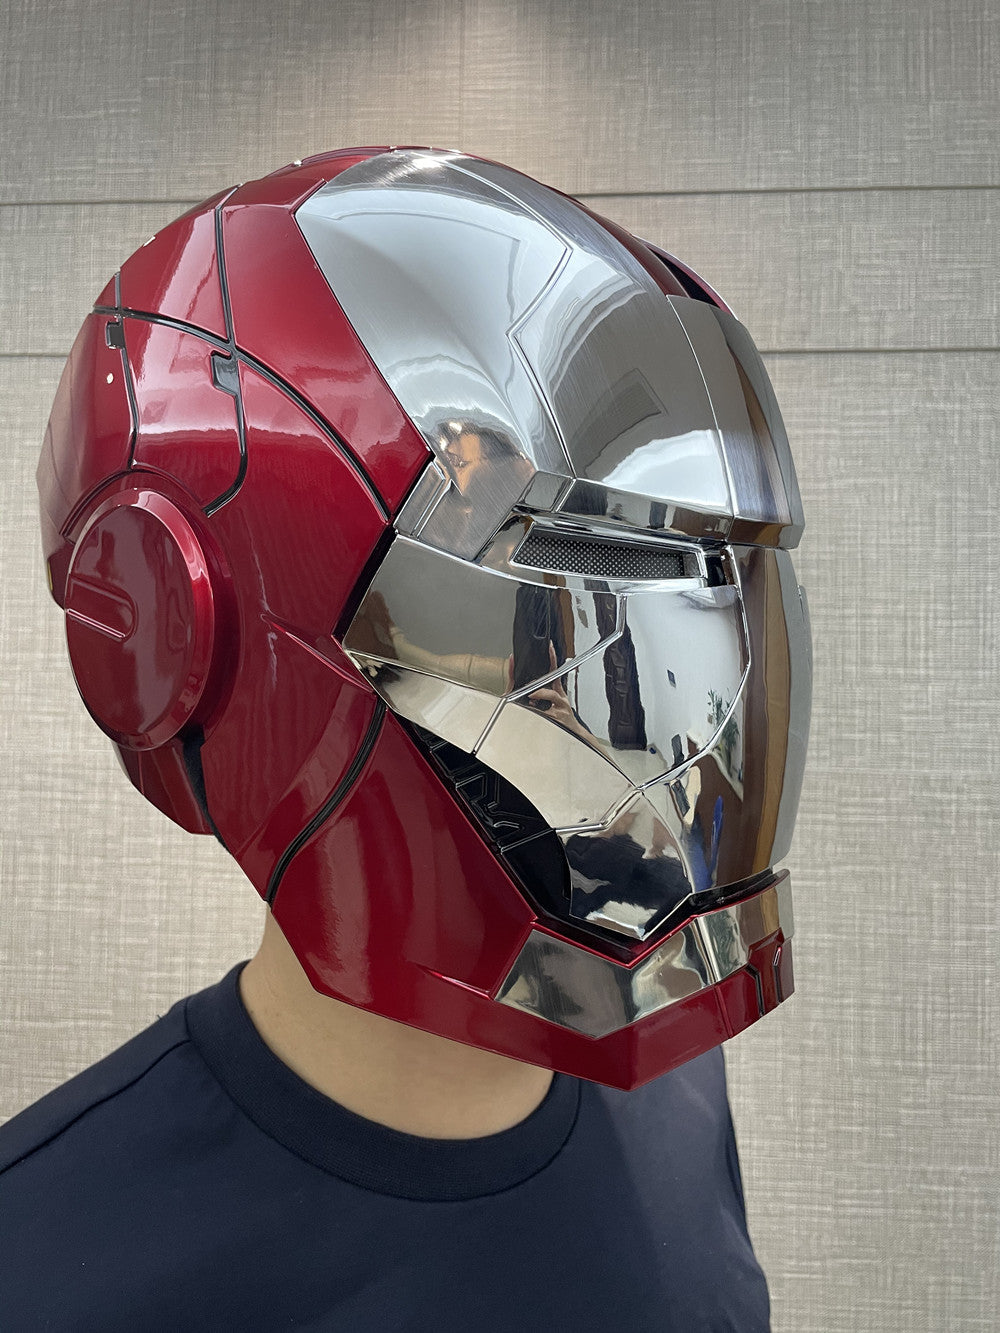 Cosplay Iron Man Mk5 Electric Helmet Multi-piece Opening And Closing Helmet Voice Control Eyes Model Toy For Children Adult Gift